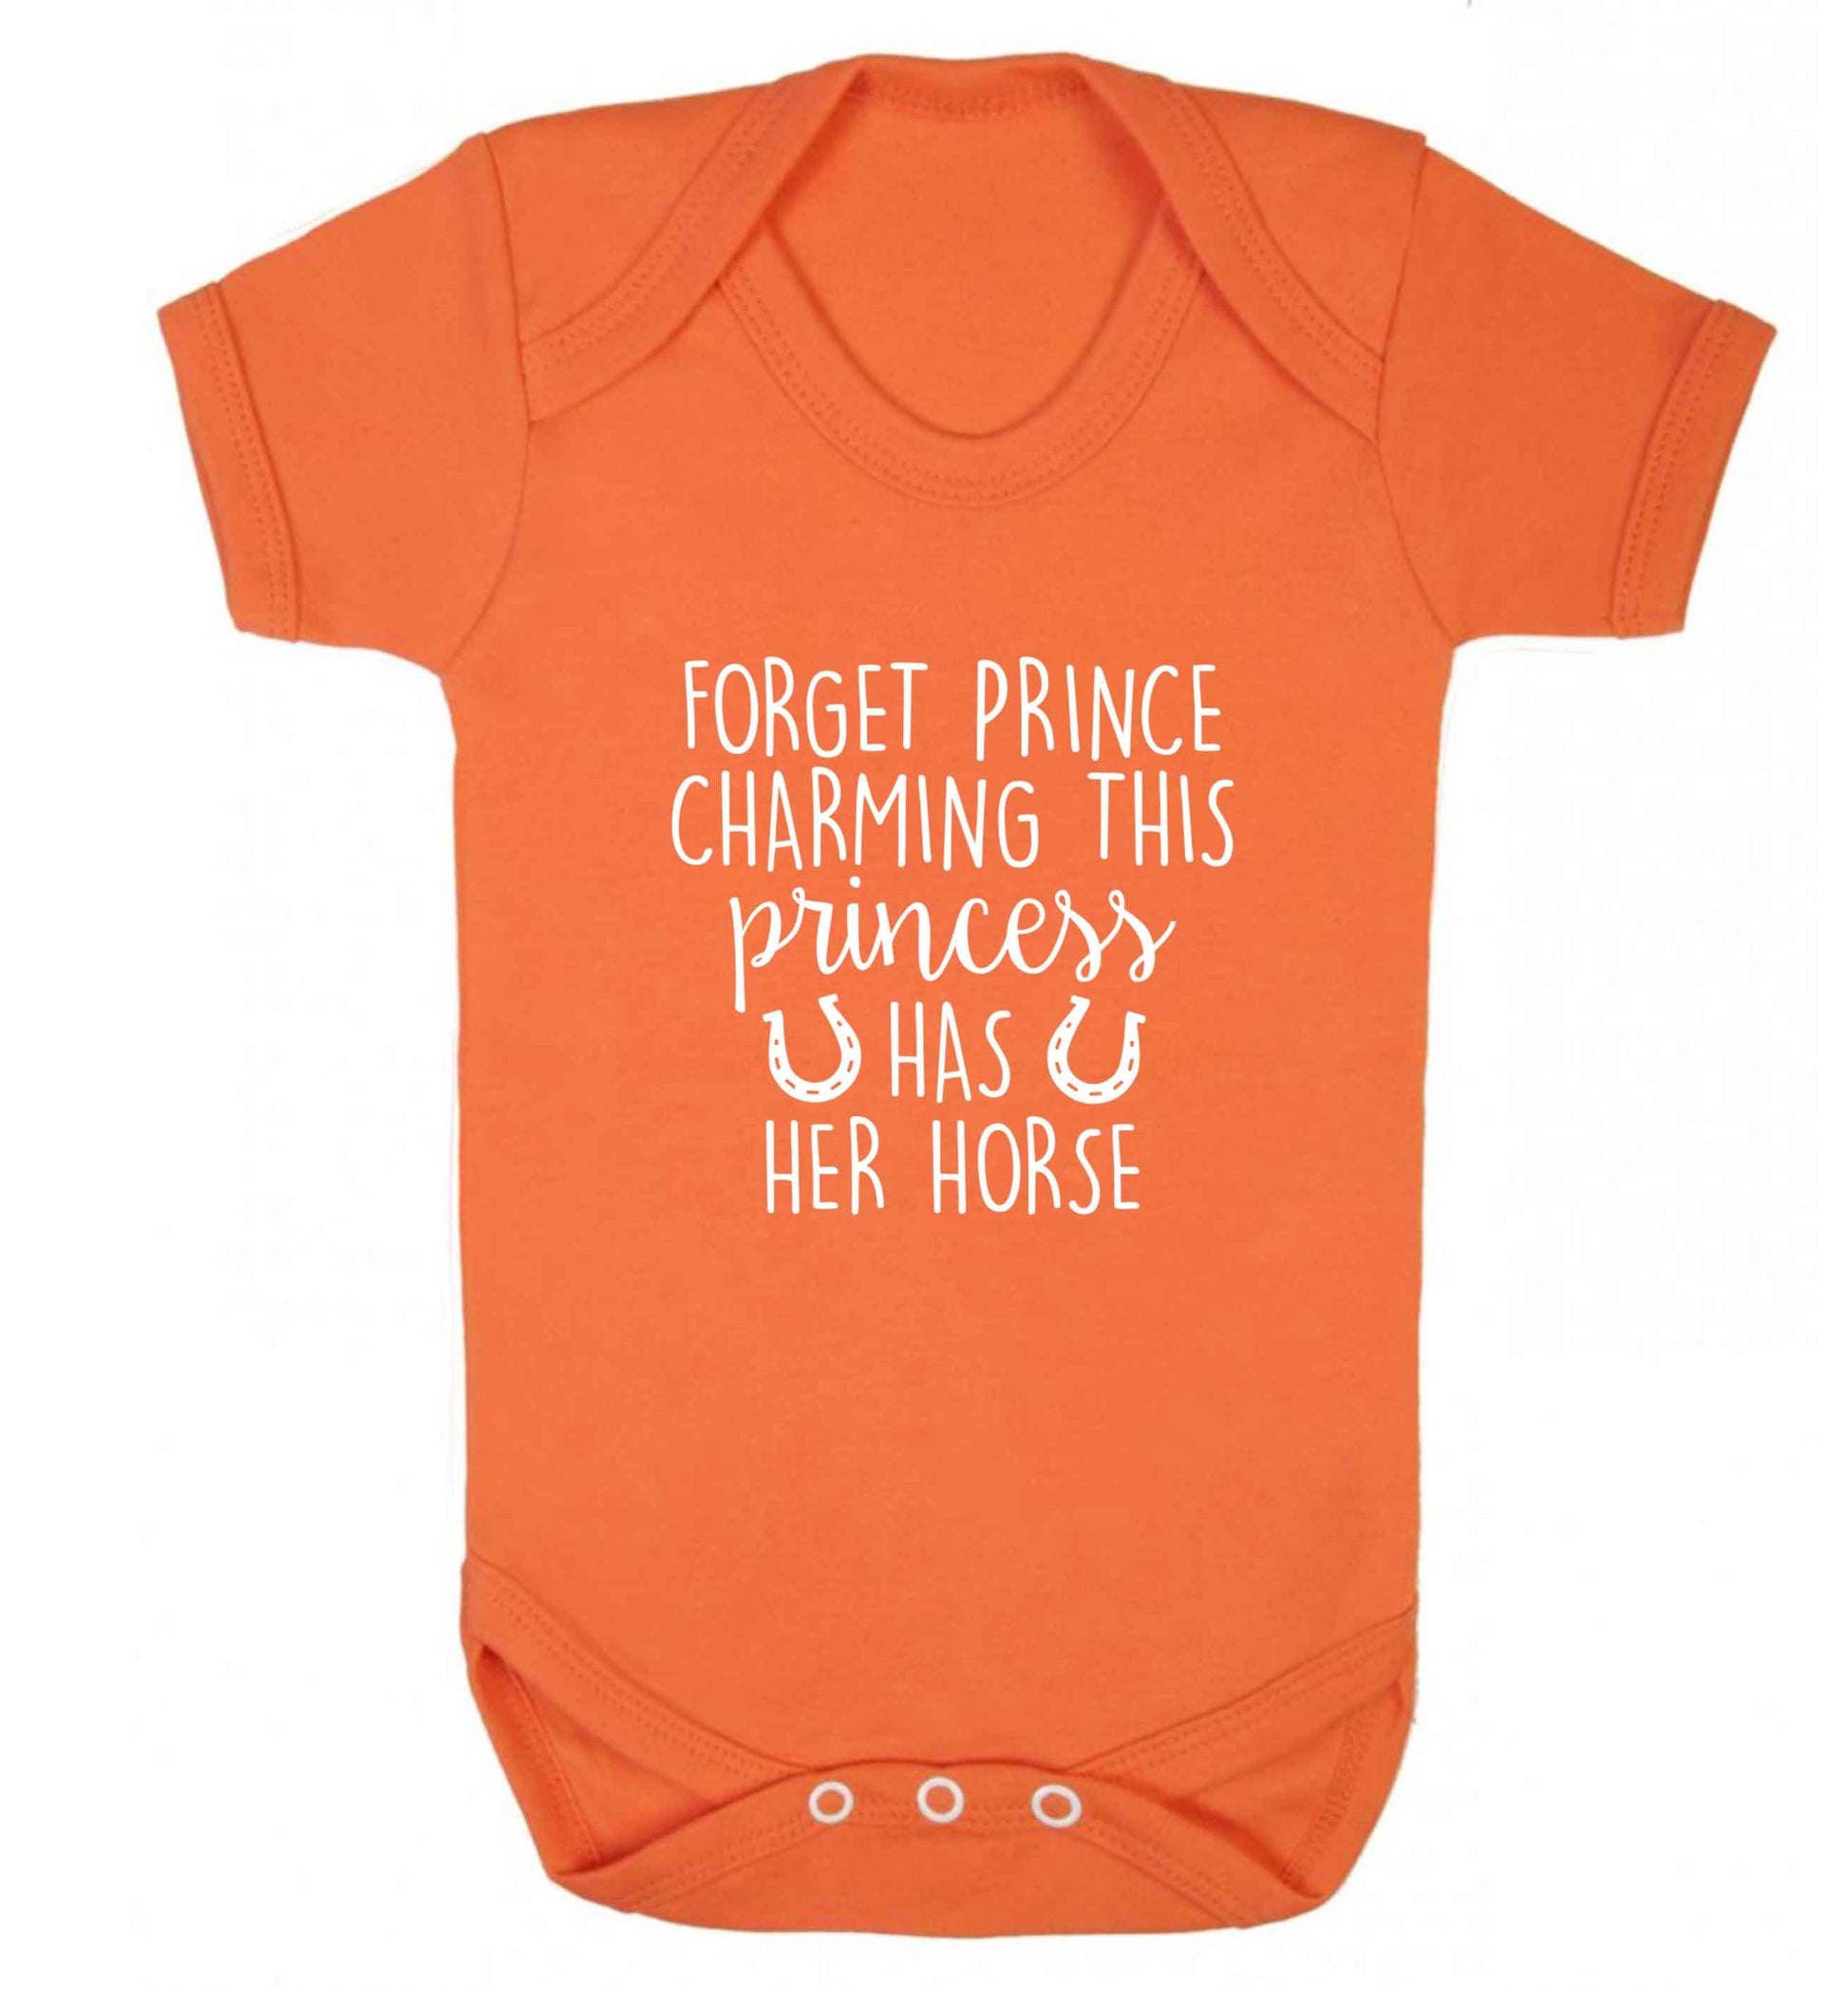 Forget prince charming this princess has her horse baby vest orange 18-24 months